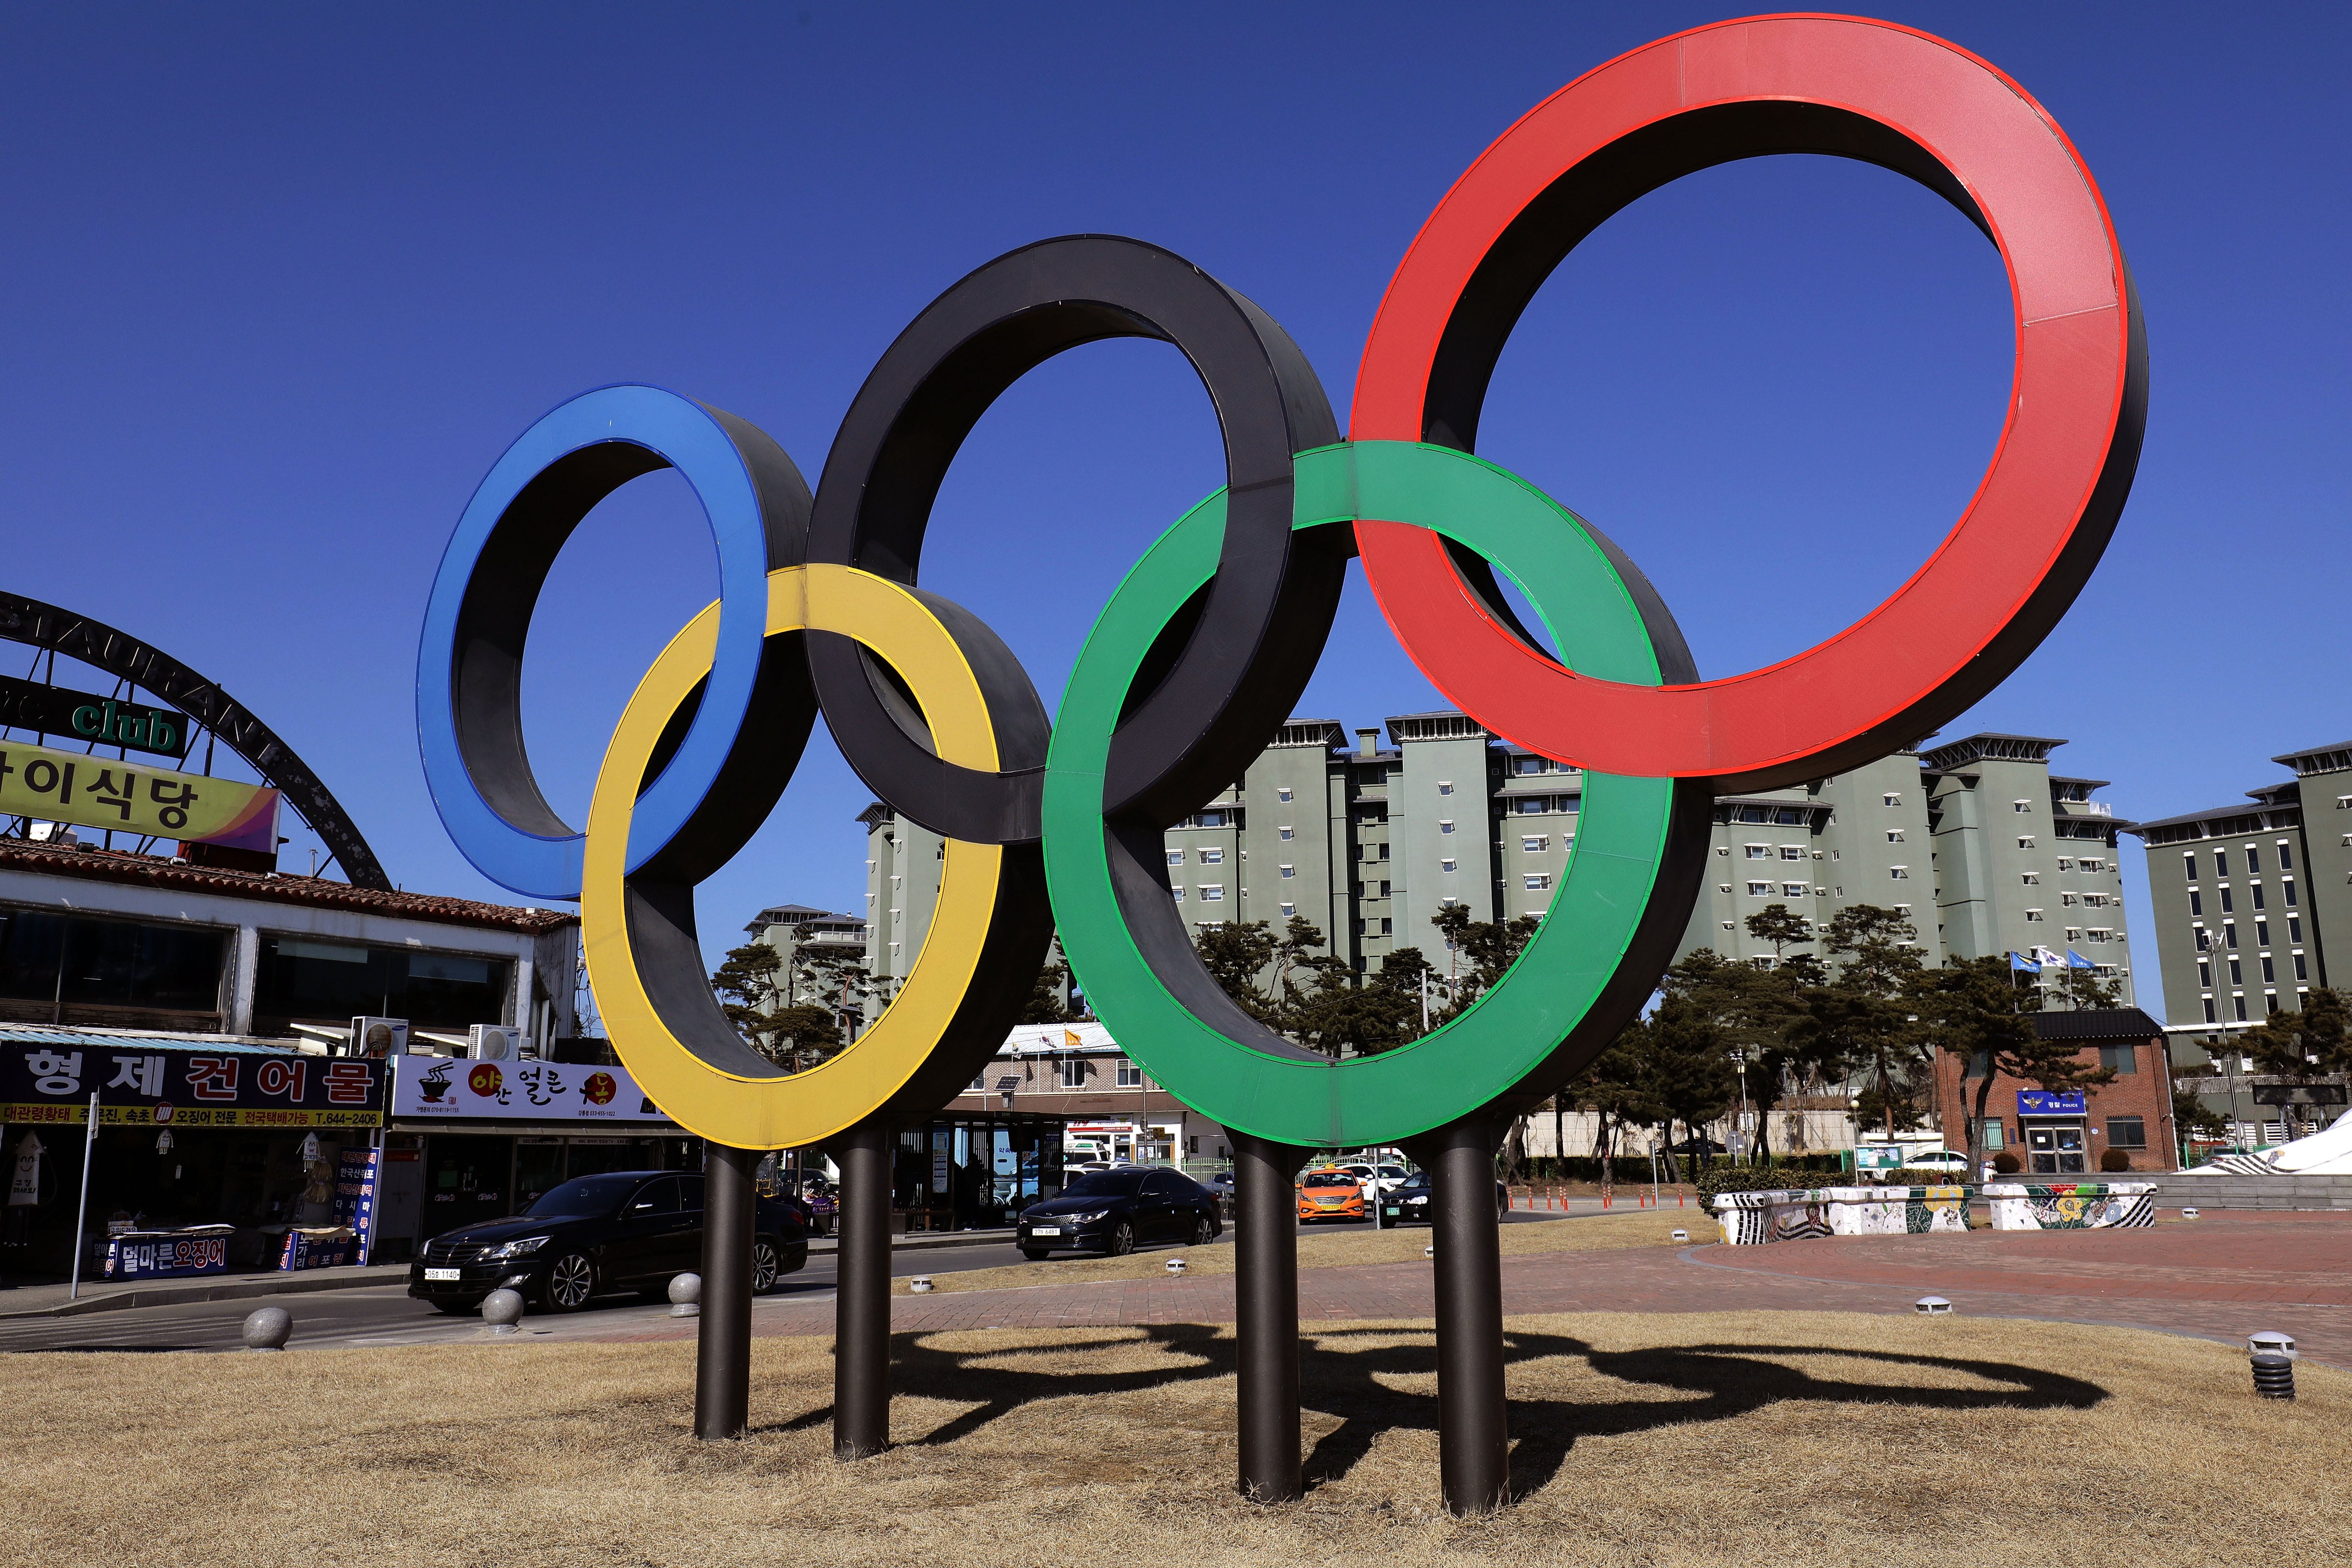 The Olympic rings is seen in Gangneung town, near the venue for the Speed Skating, Figure Skating and Ice Hockey ahead of PyeongChang 2018 Winter Olympic Games on February 8, 2017 in Gangneung, South Korea. (Chung Sung-Jun, Getty Images)